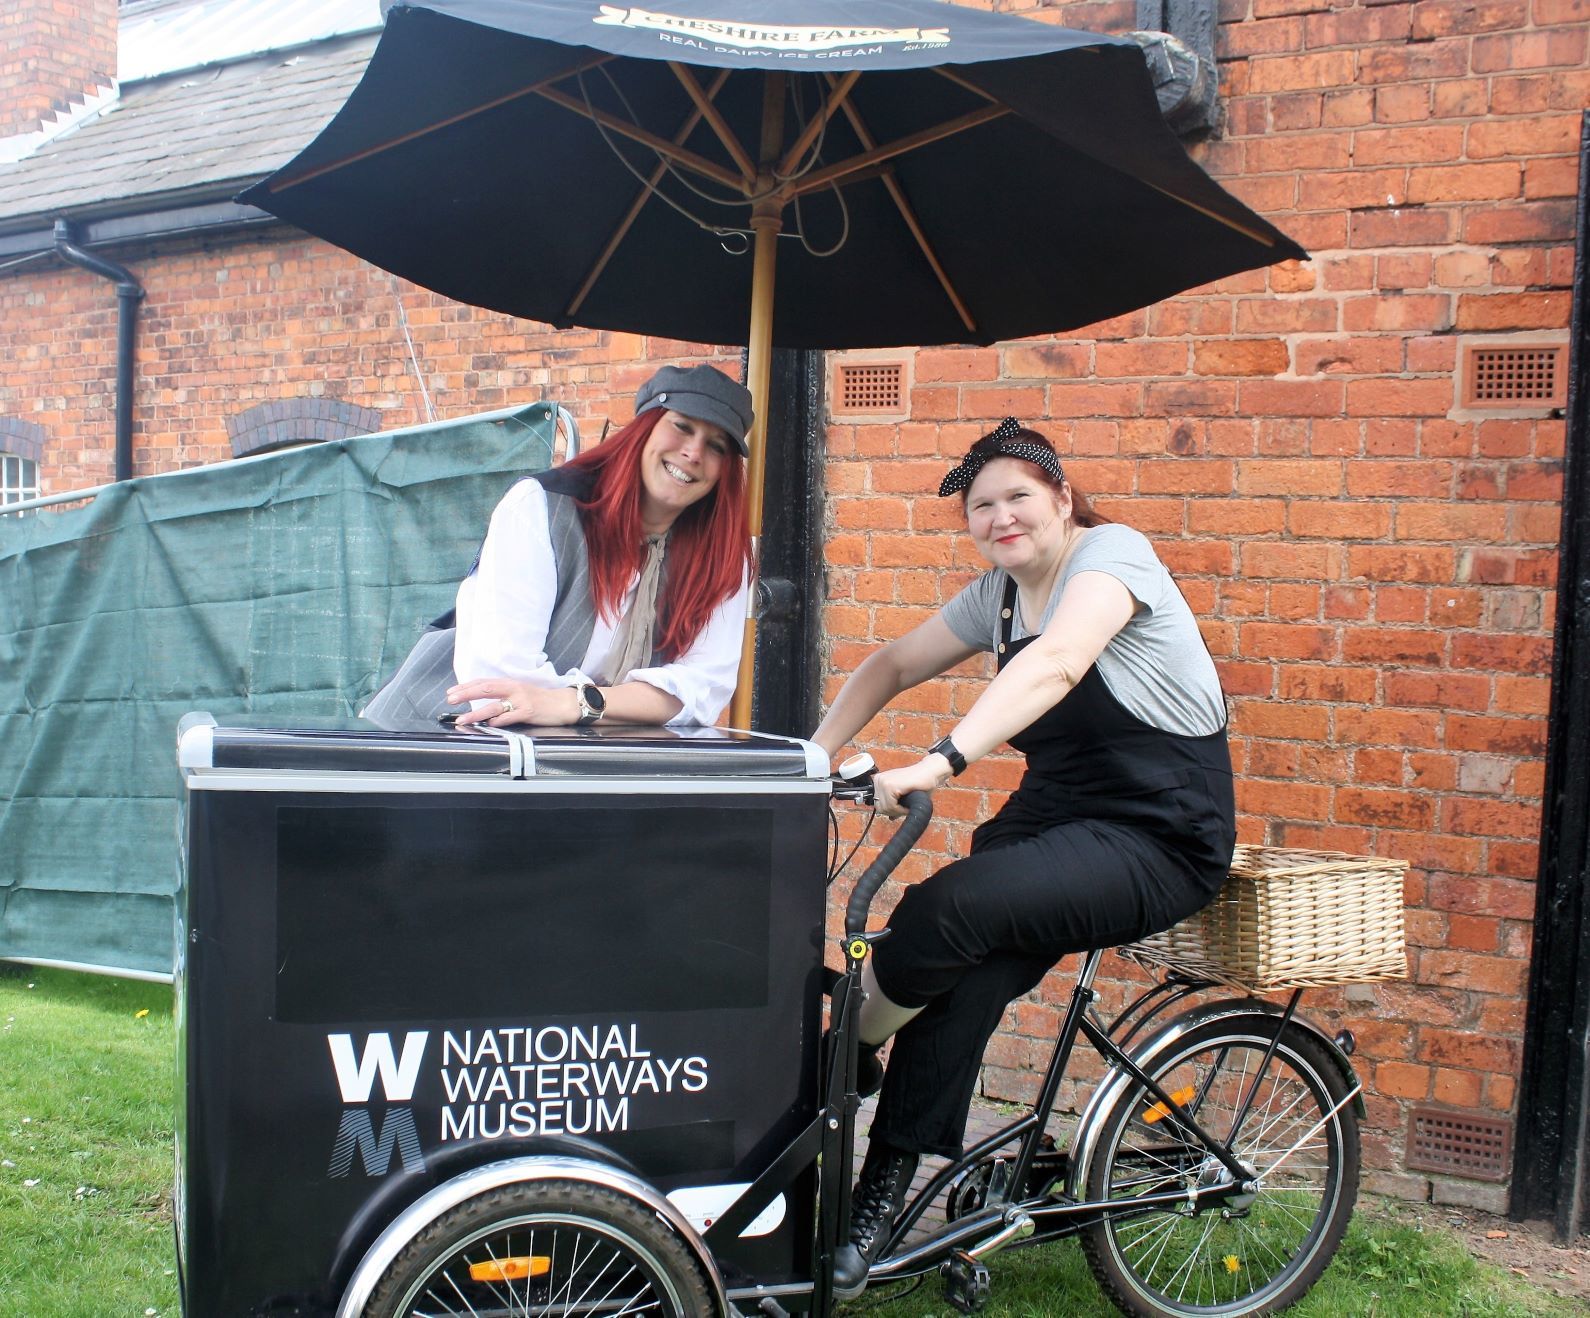 The ice cream bicycle will be one of the attractions planned.